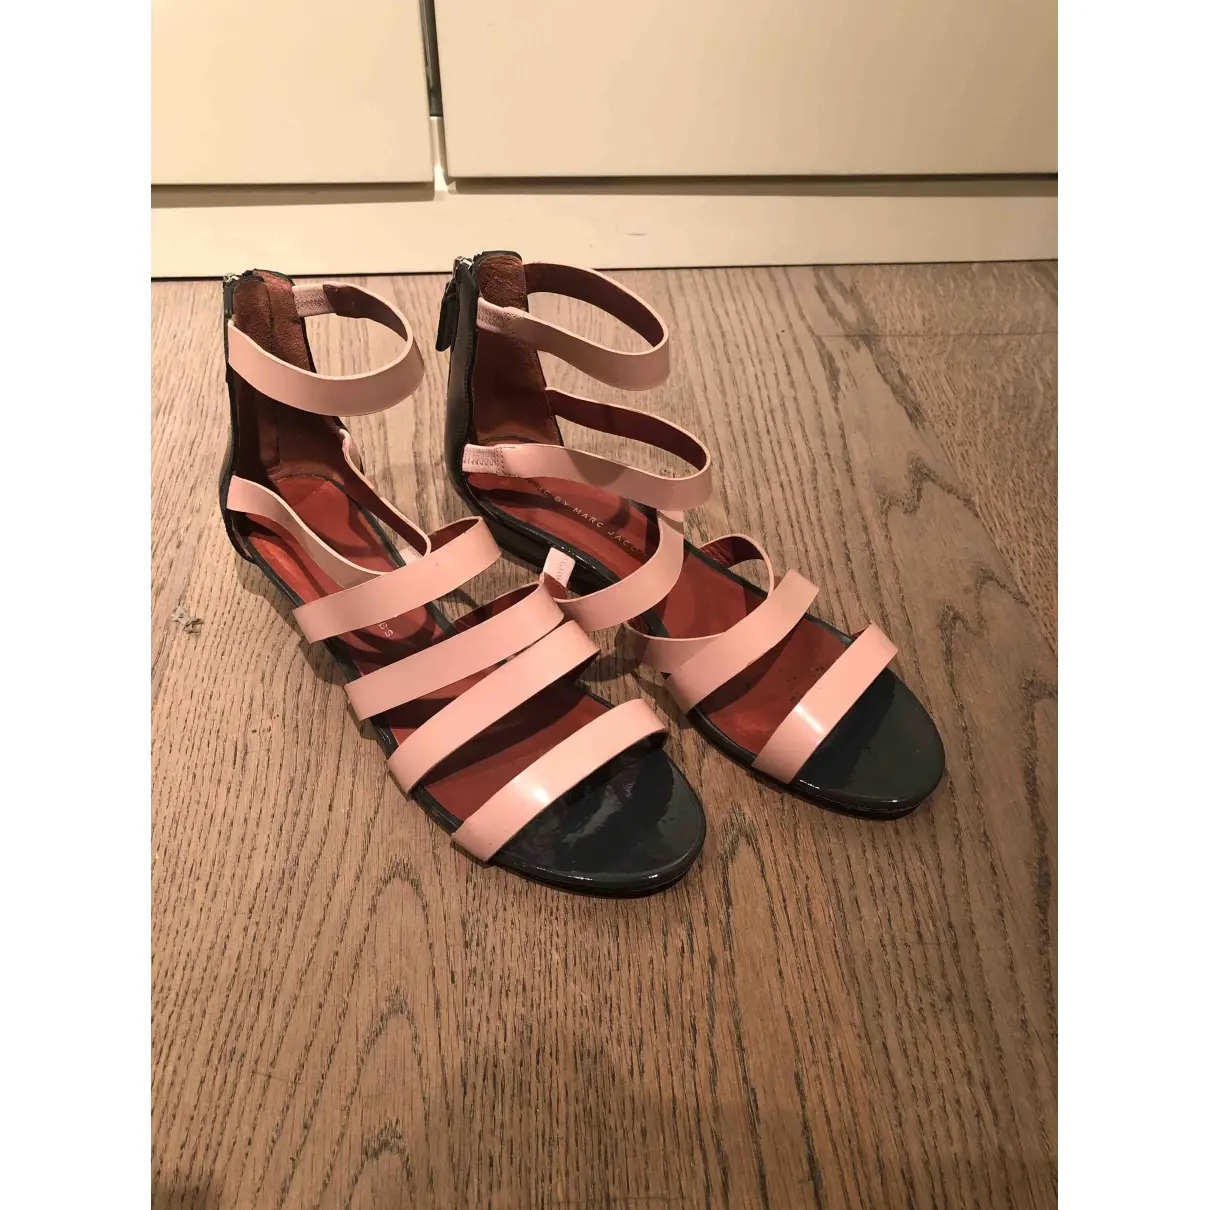 Marc by Marc Jacobs Leather sandals for sale